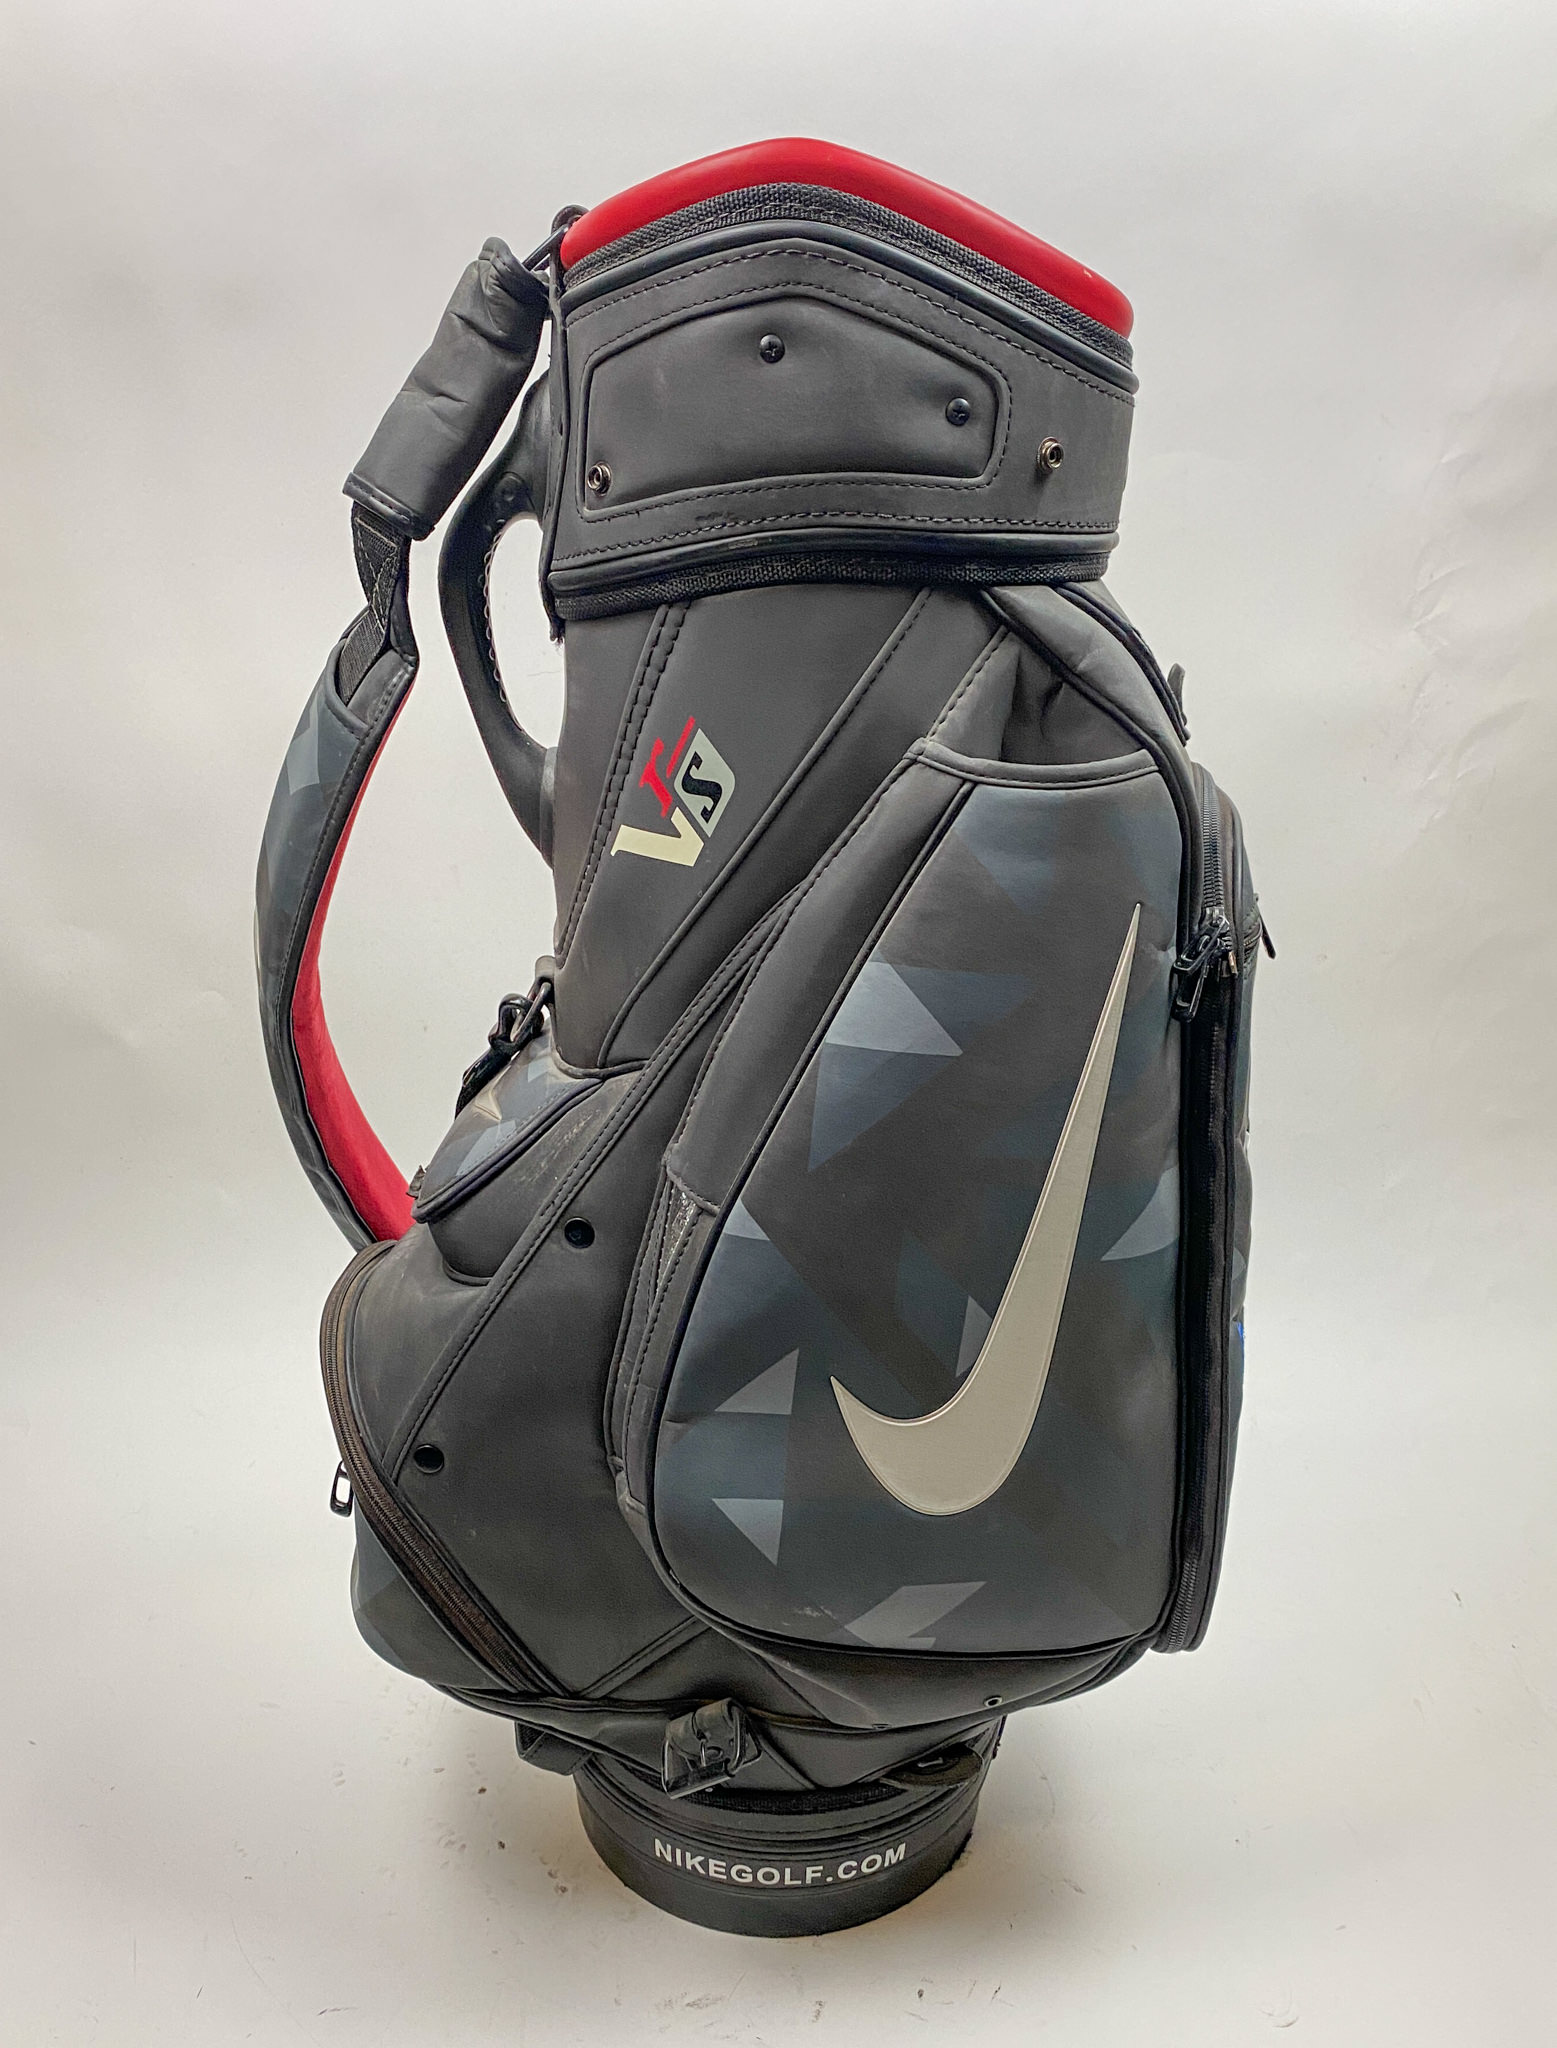 Ecologie Assert Transistor Used Gray/Red Nike VRS Golf Staff Bag with Strap Embroidered Phillip Reedy  · SwingPoint Golf®